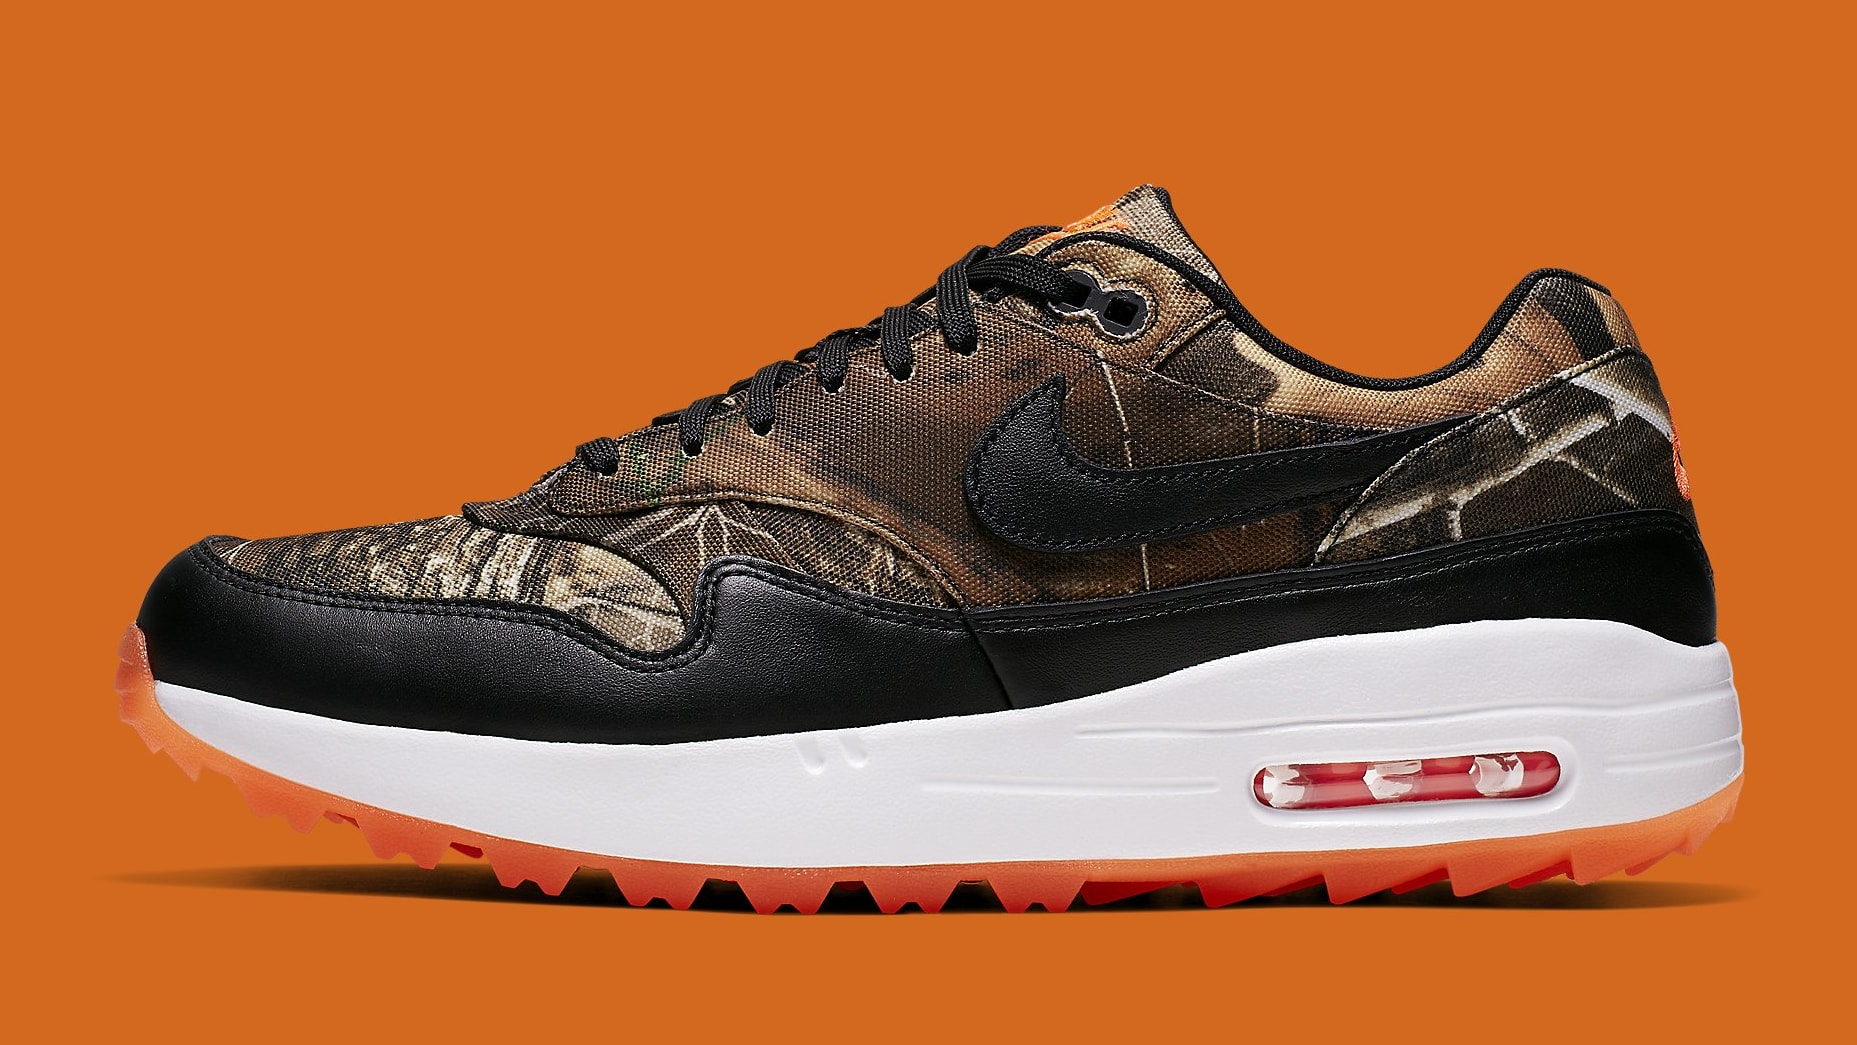 Nike Is Adding Realtree Camo to the Air Max 1 Golf Shoe | Complex